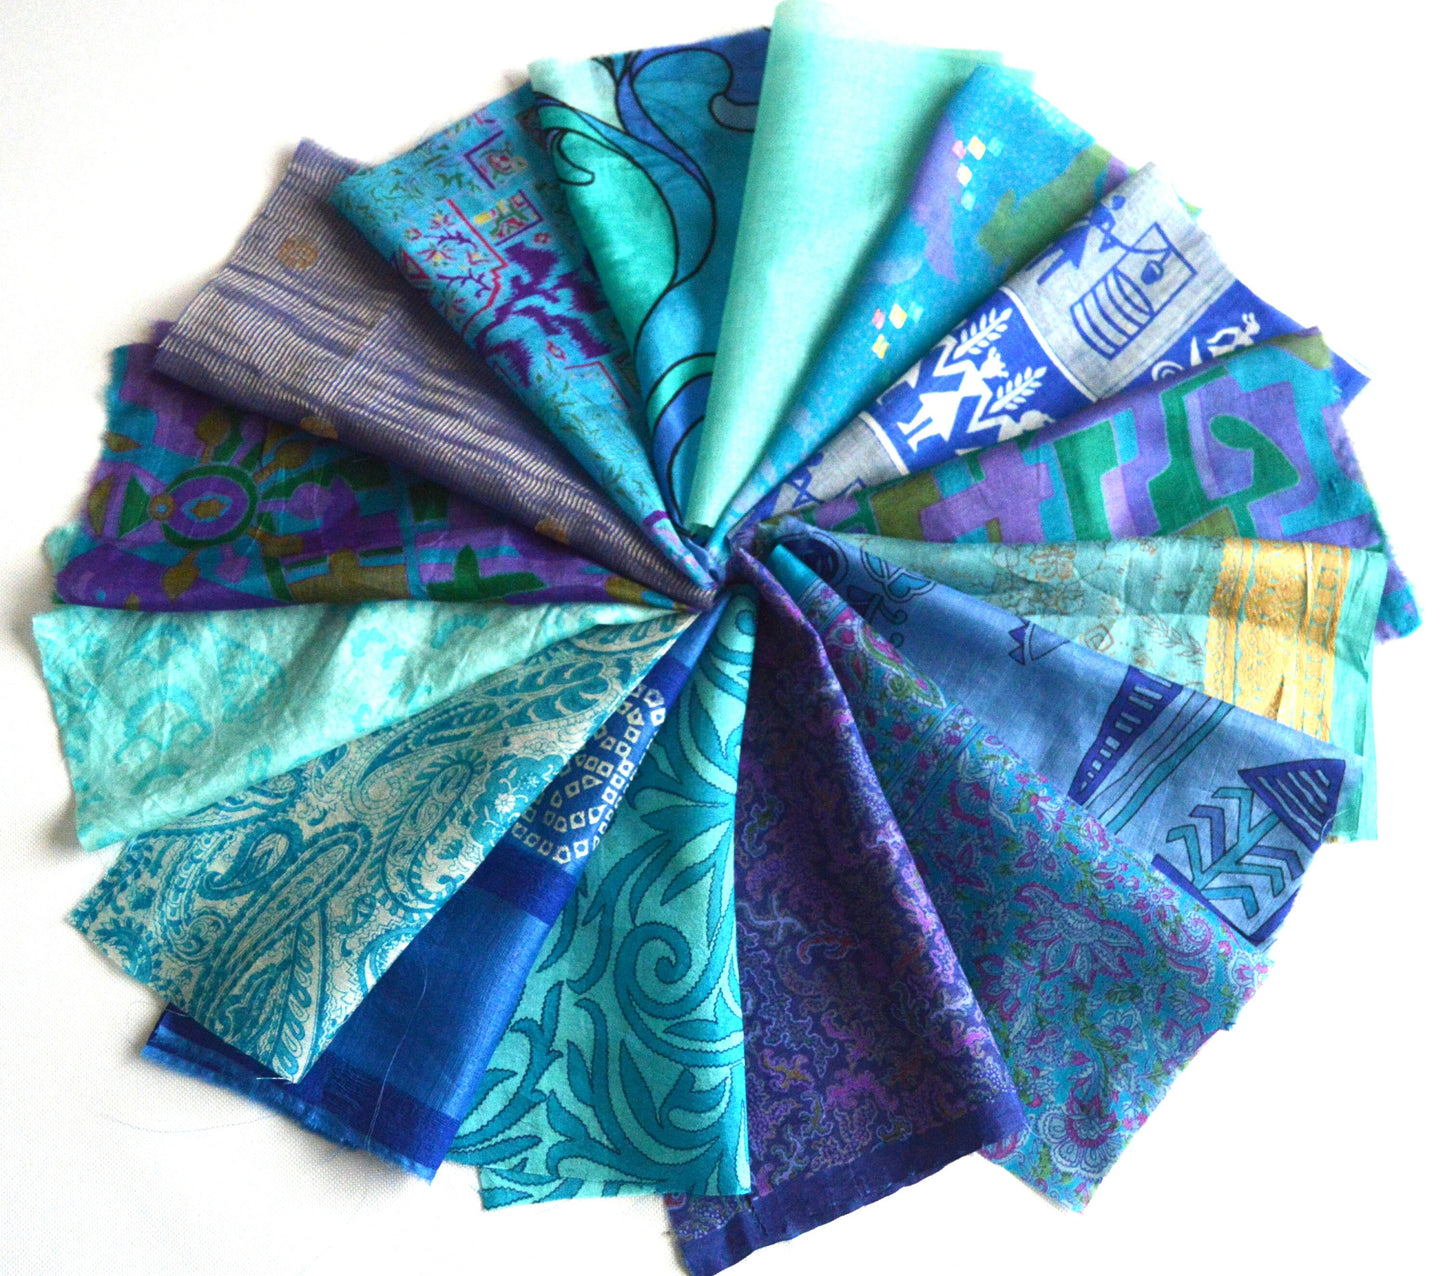 8 Inch x 16 Pieces Blue Upcycled Vintage Sari Silk Squares